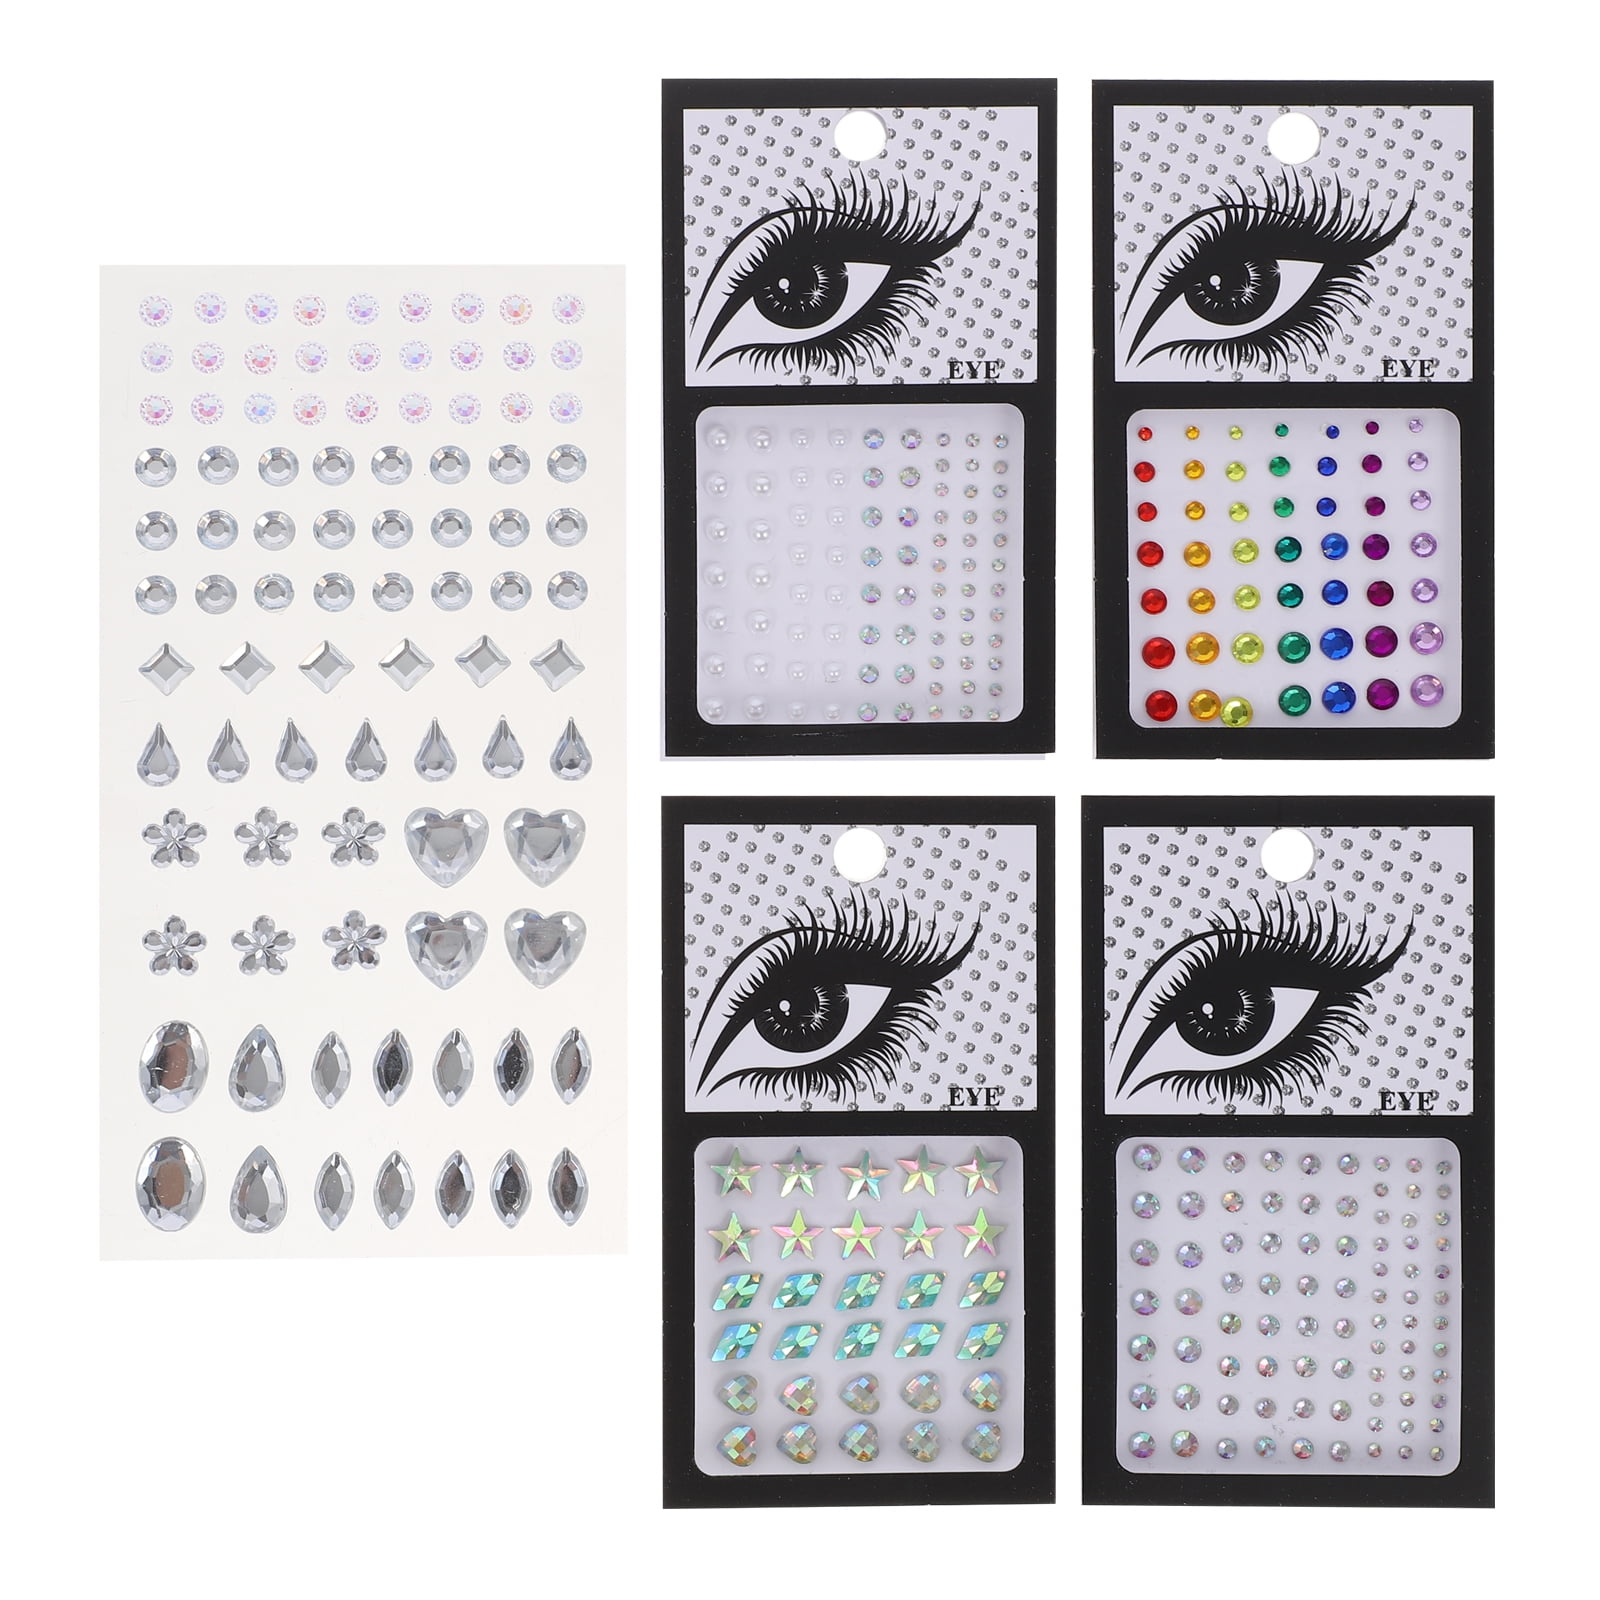 6 Sheets Face Gems Craft Jewels and Gems Face Jewelry Makeup Rhinestones for Eyes, Adult Unisex, Size: 5.91 x 5.91 x 0.79, Grey Type